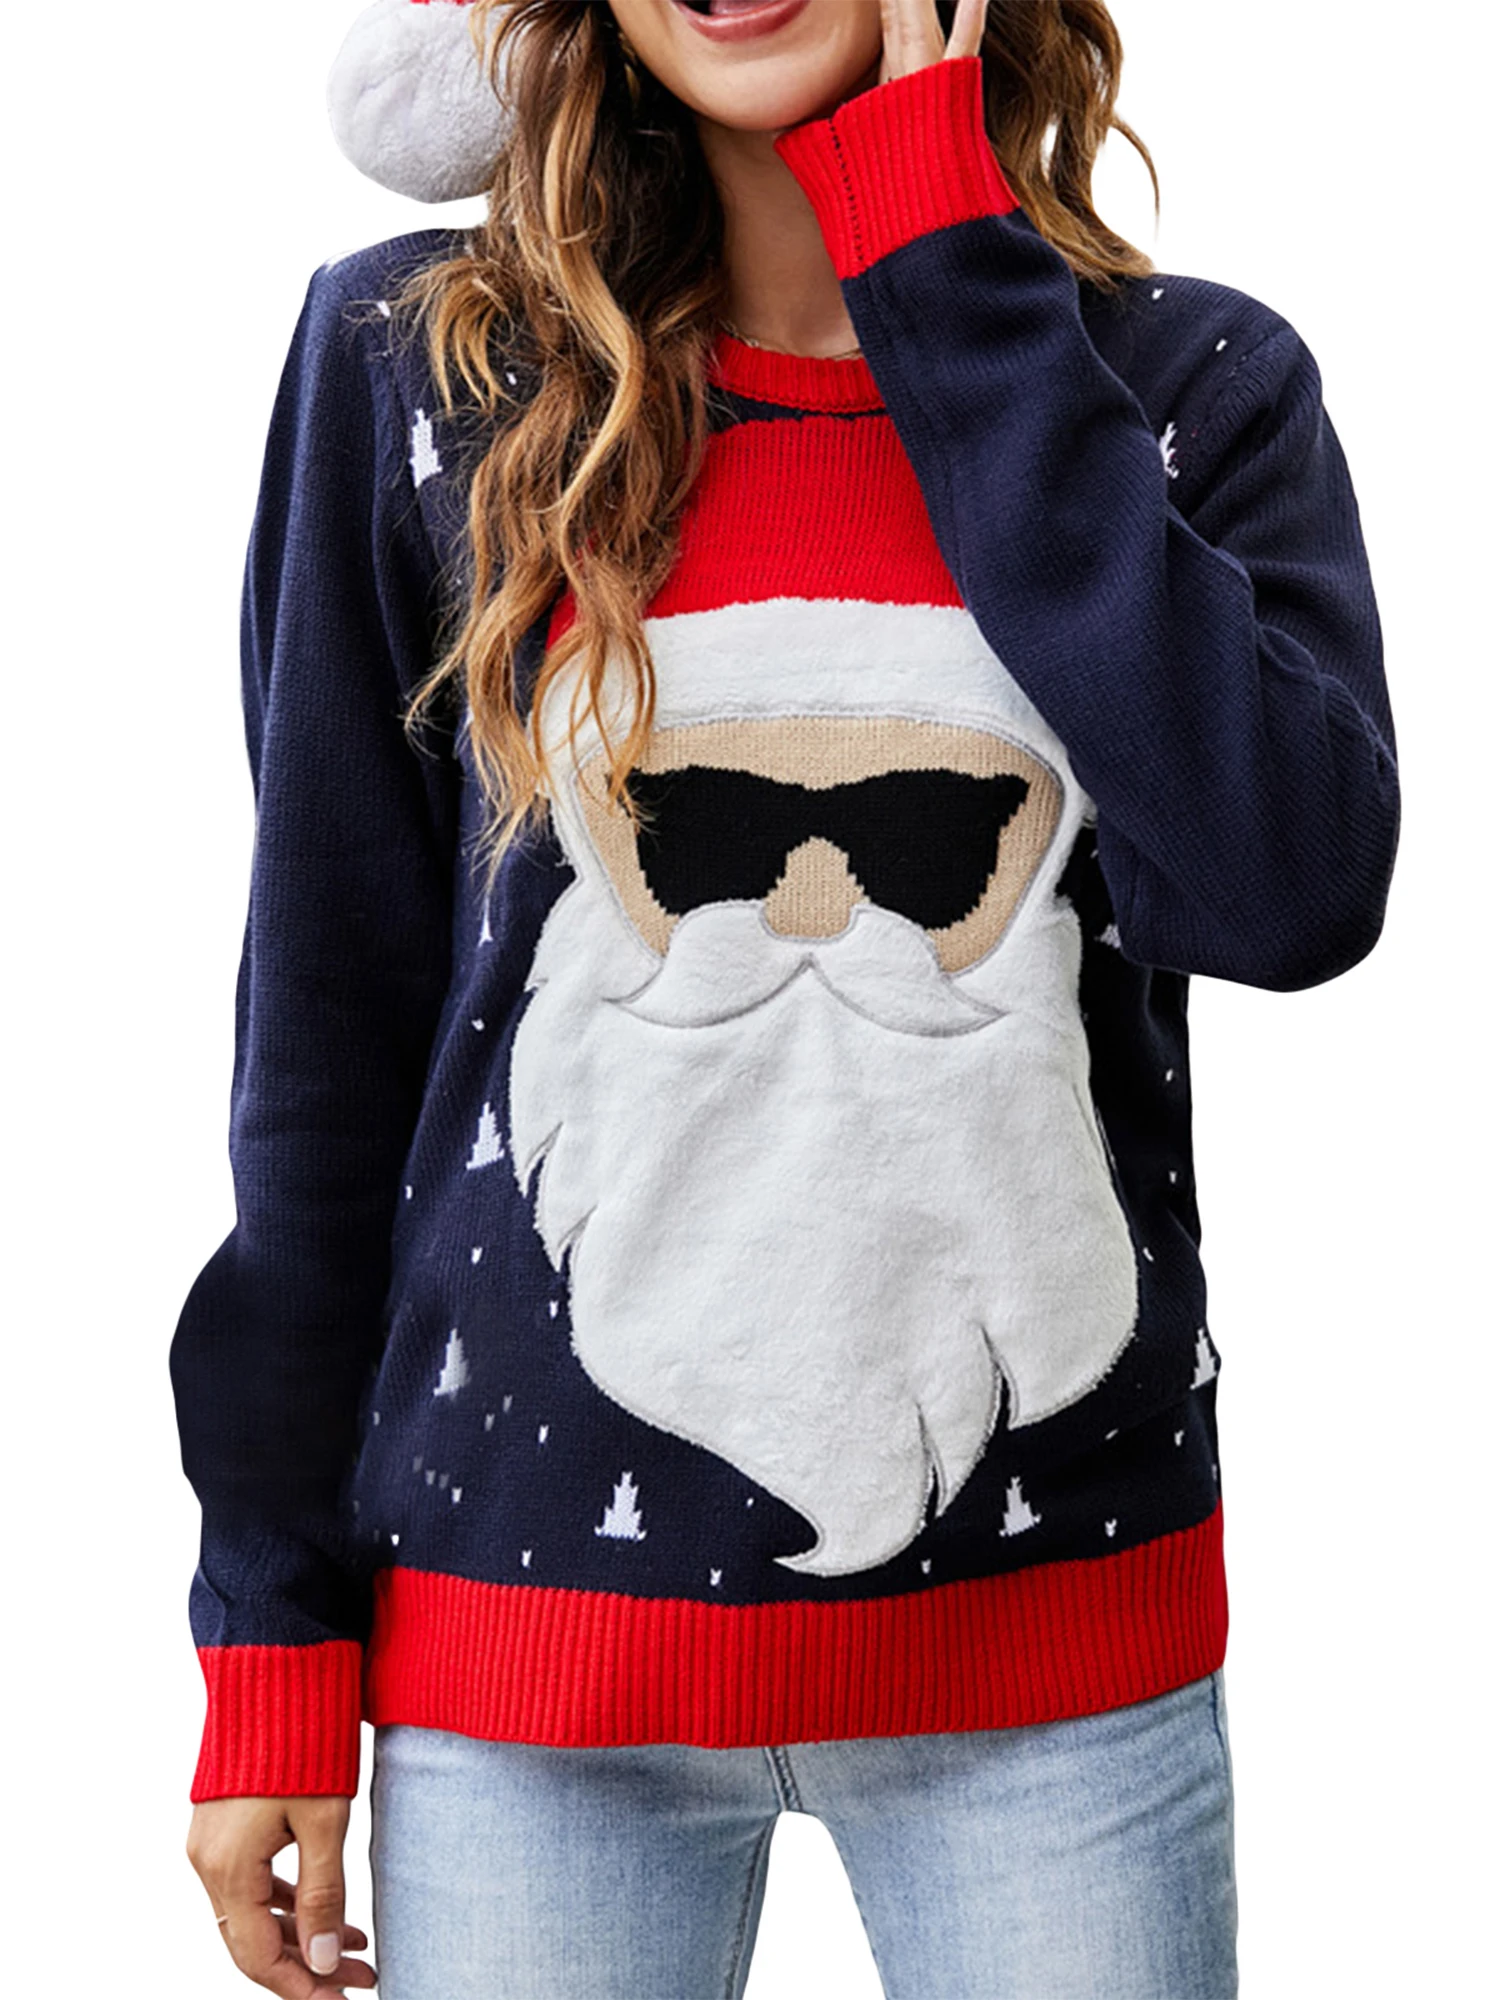 

Women s Festive Reindeer Christmas Sweater - Cozy Long Sleeve Xmas Pullover with Round Neck for Girls and Ladies